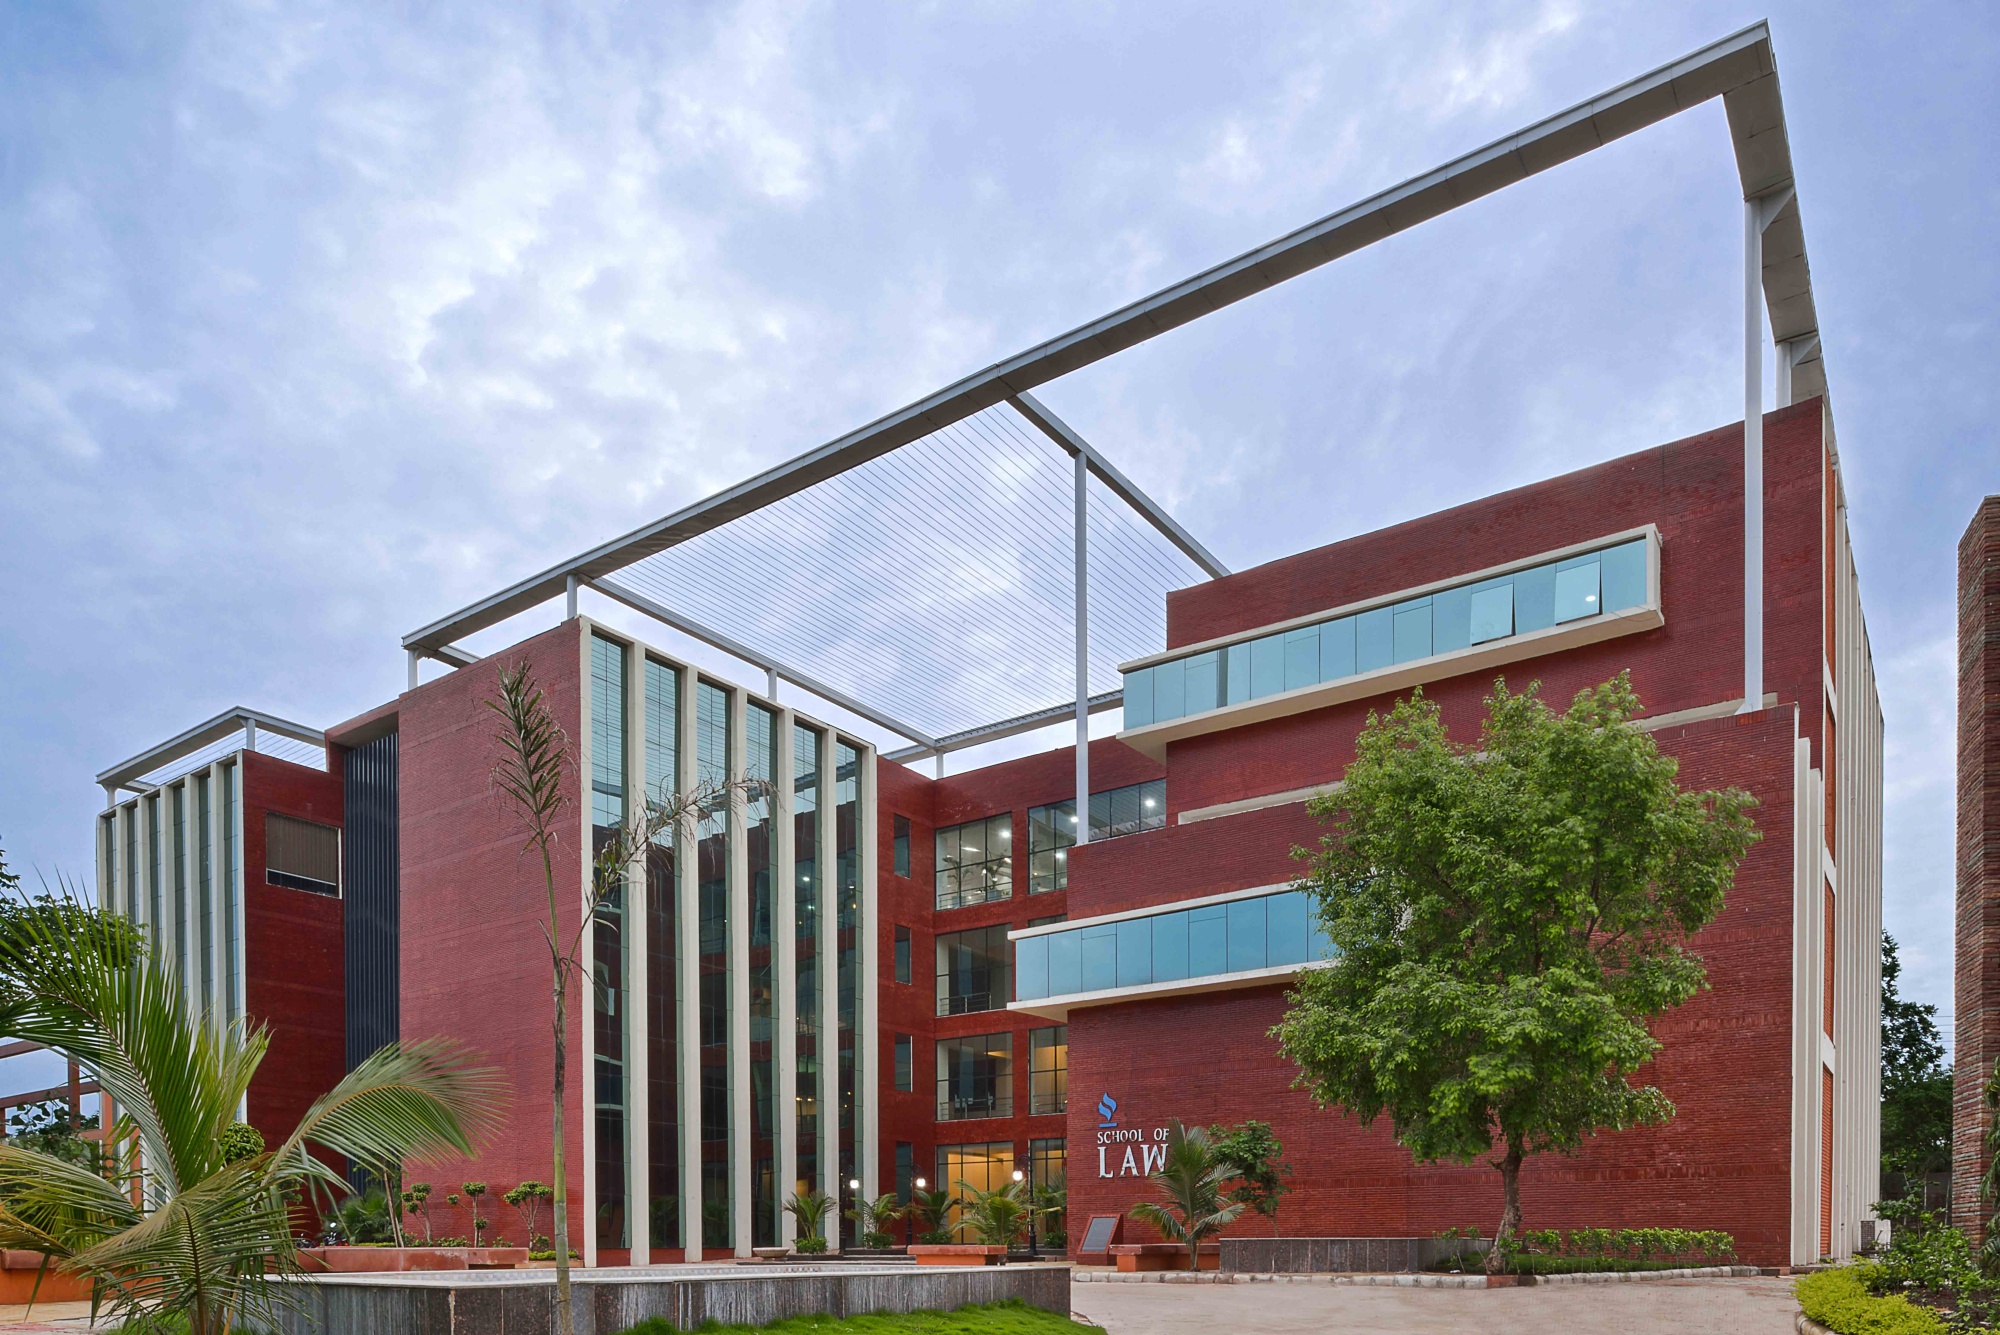 School of Law, Jagran Lakecity University, Bhopal, by 42 MM Architecture